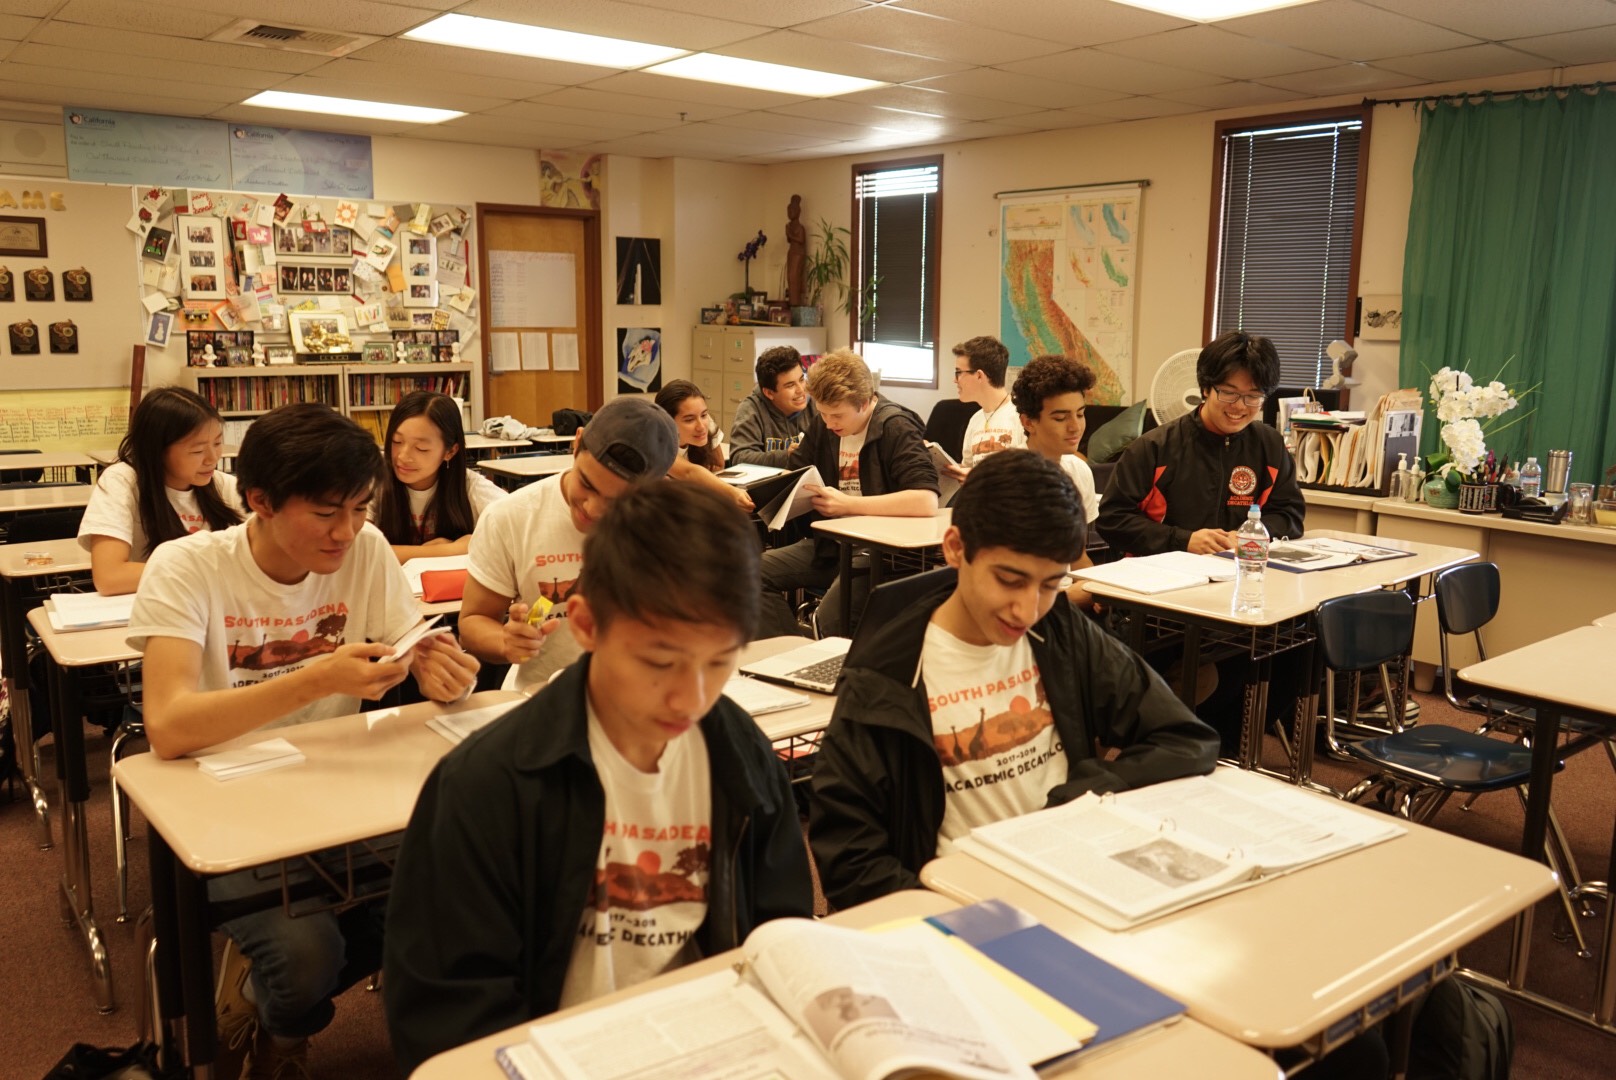 Thumbnail for Academic Decathlon prevails, setting fourth county record